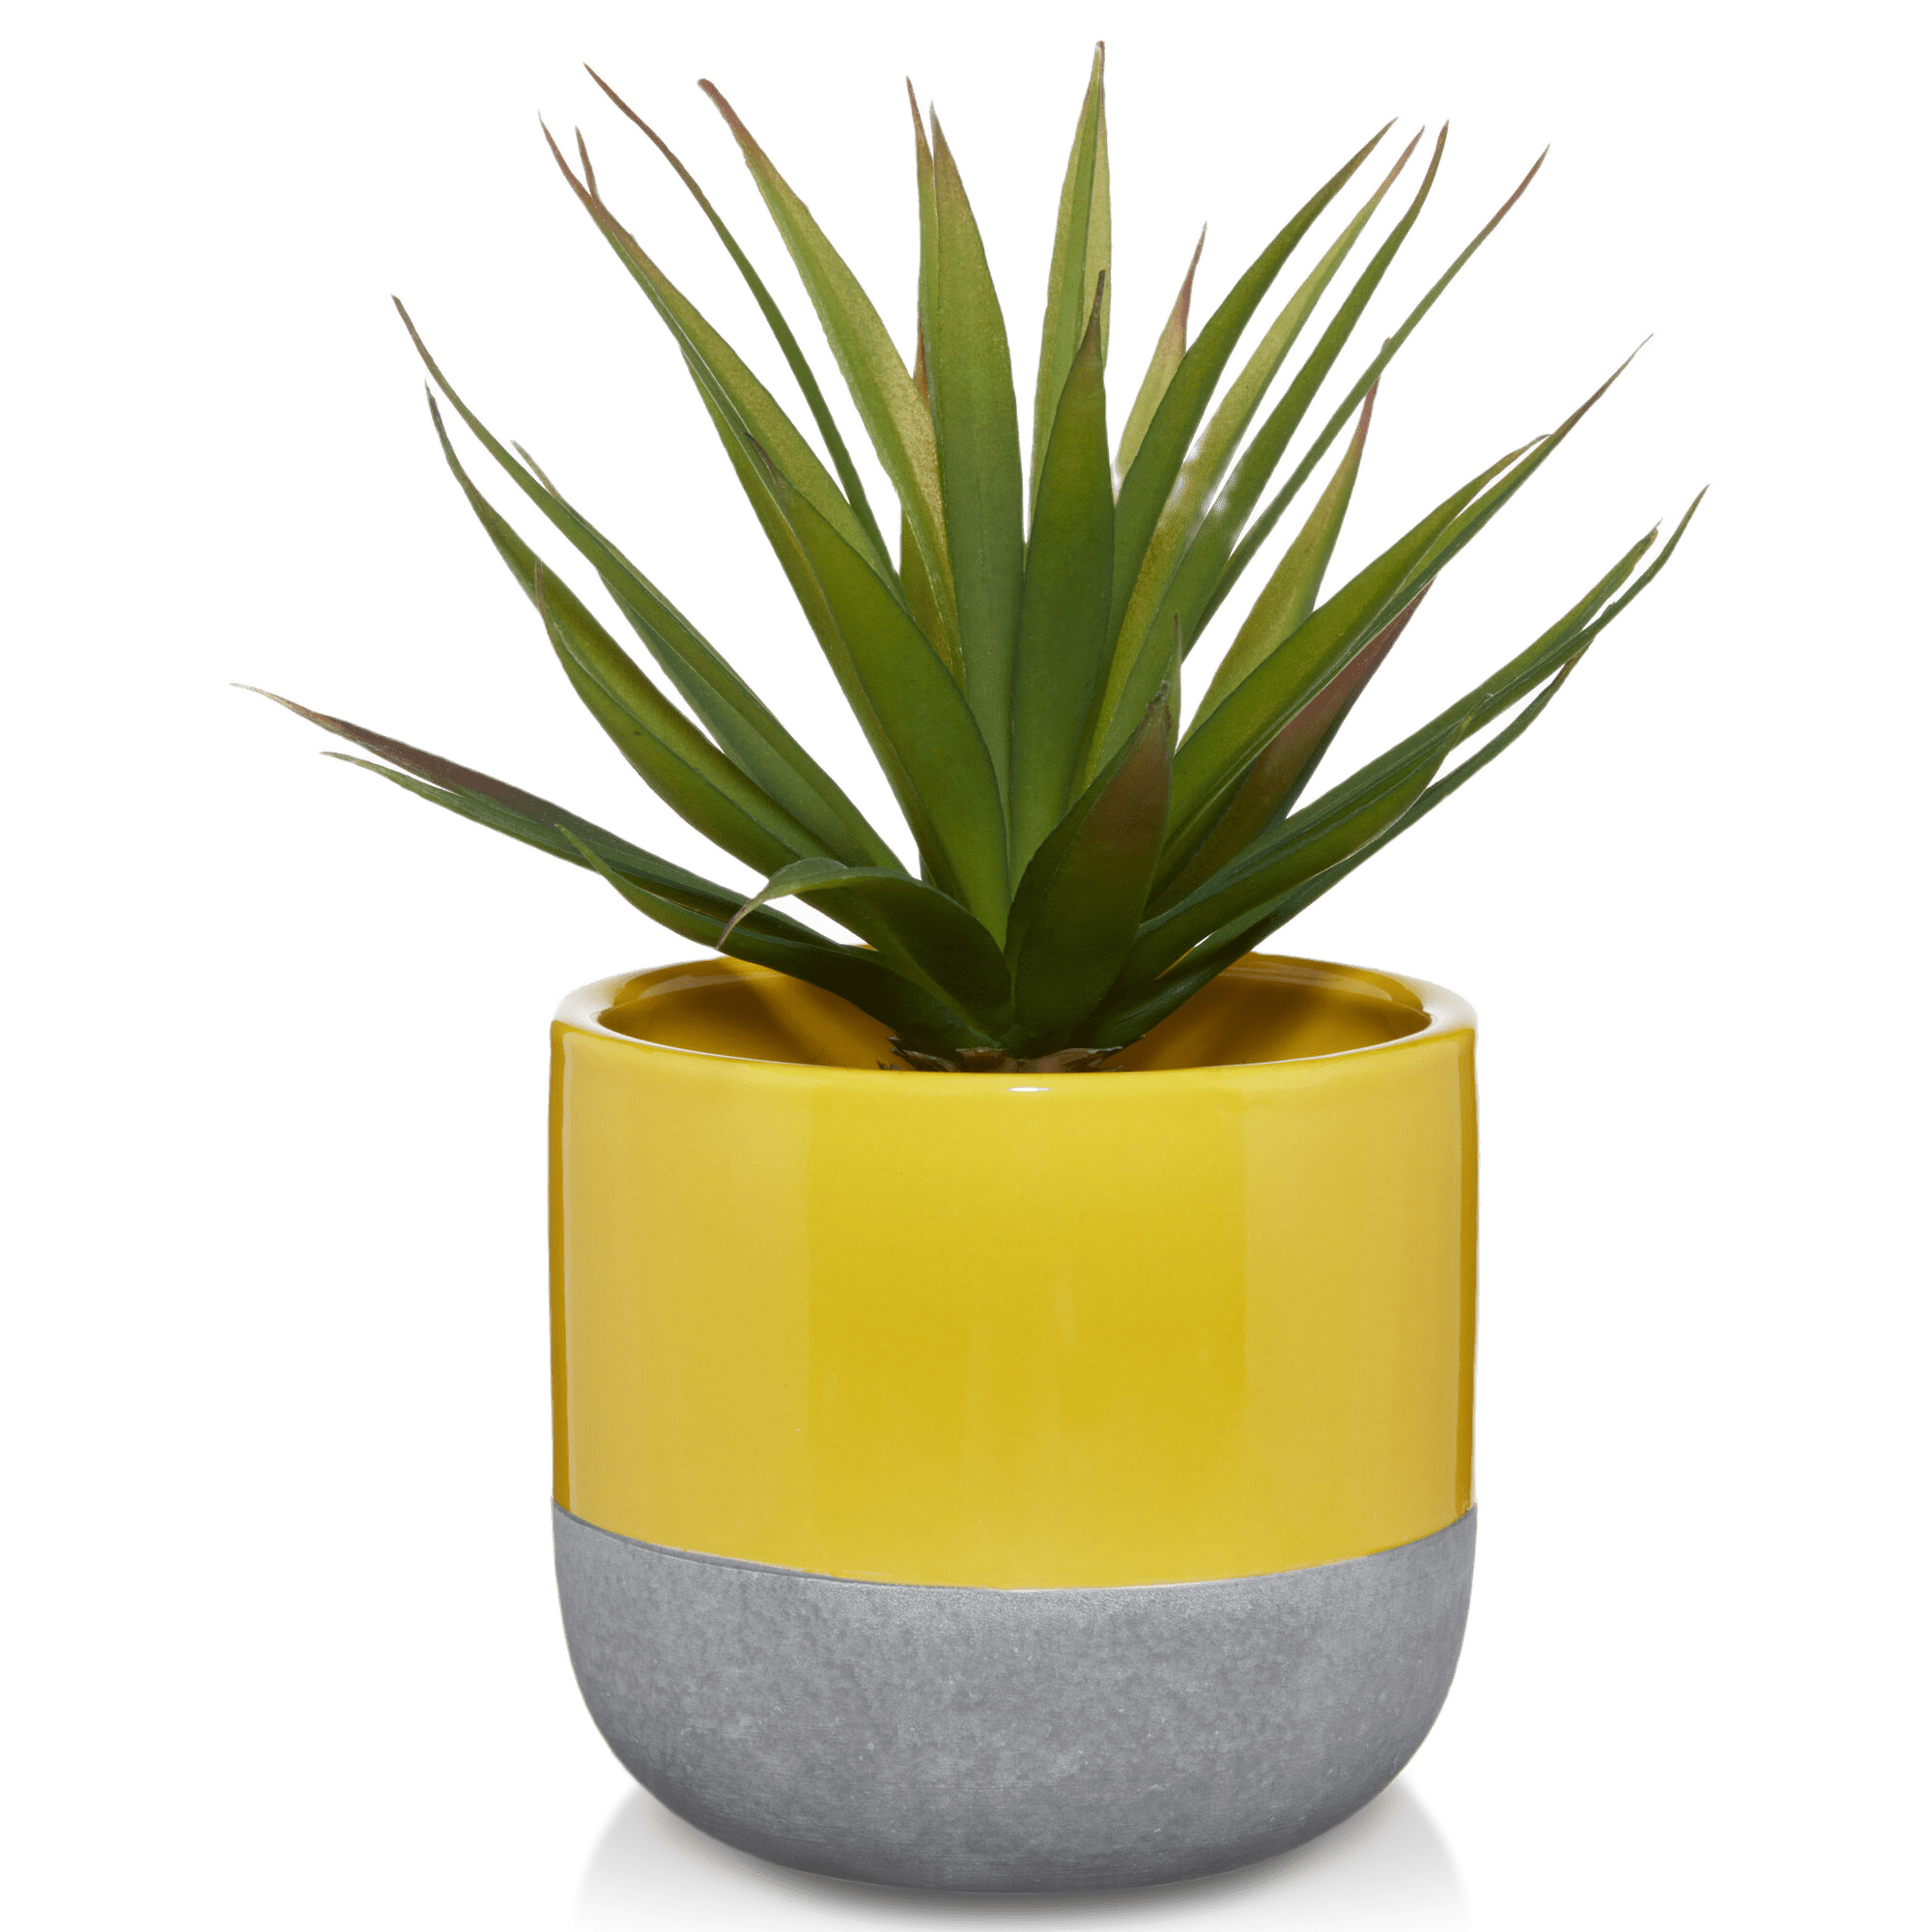 Ceramic Potted Grass